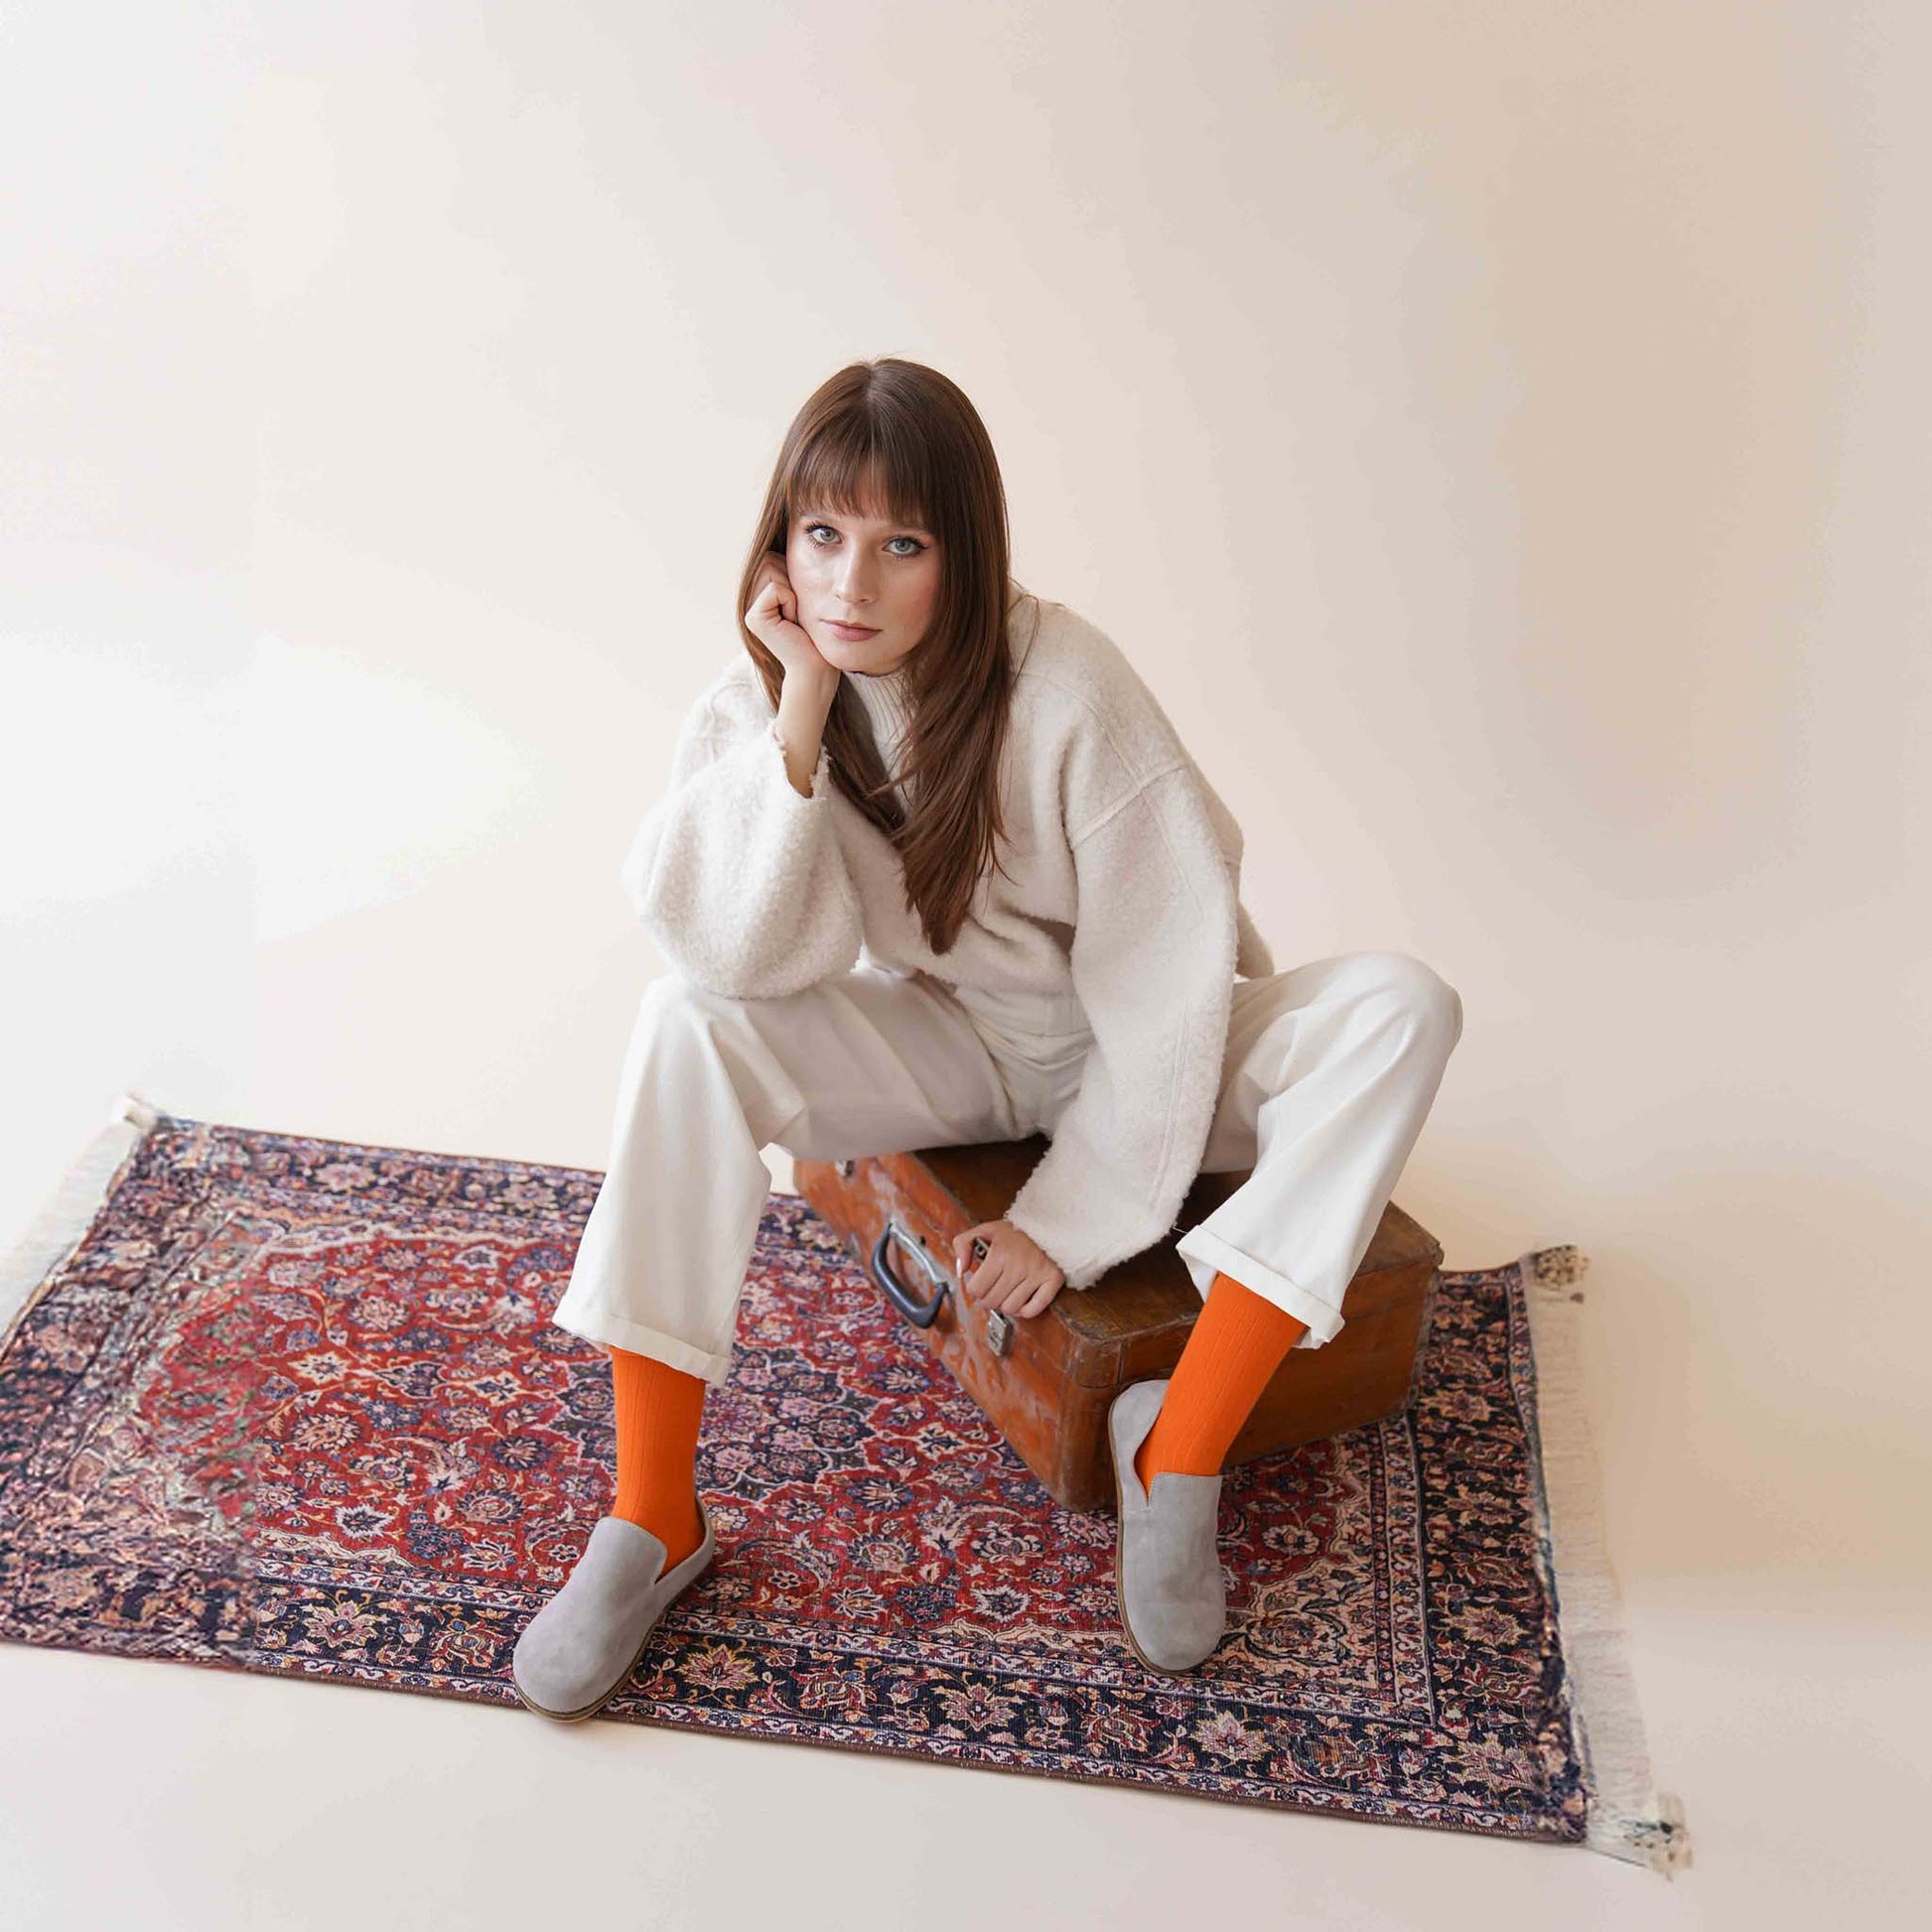 Model wearing Aeolia gray suede barefoot loafers, white pants, orange socks, seated on a vintage suitcase on a patterned rug.